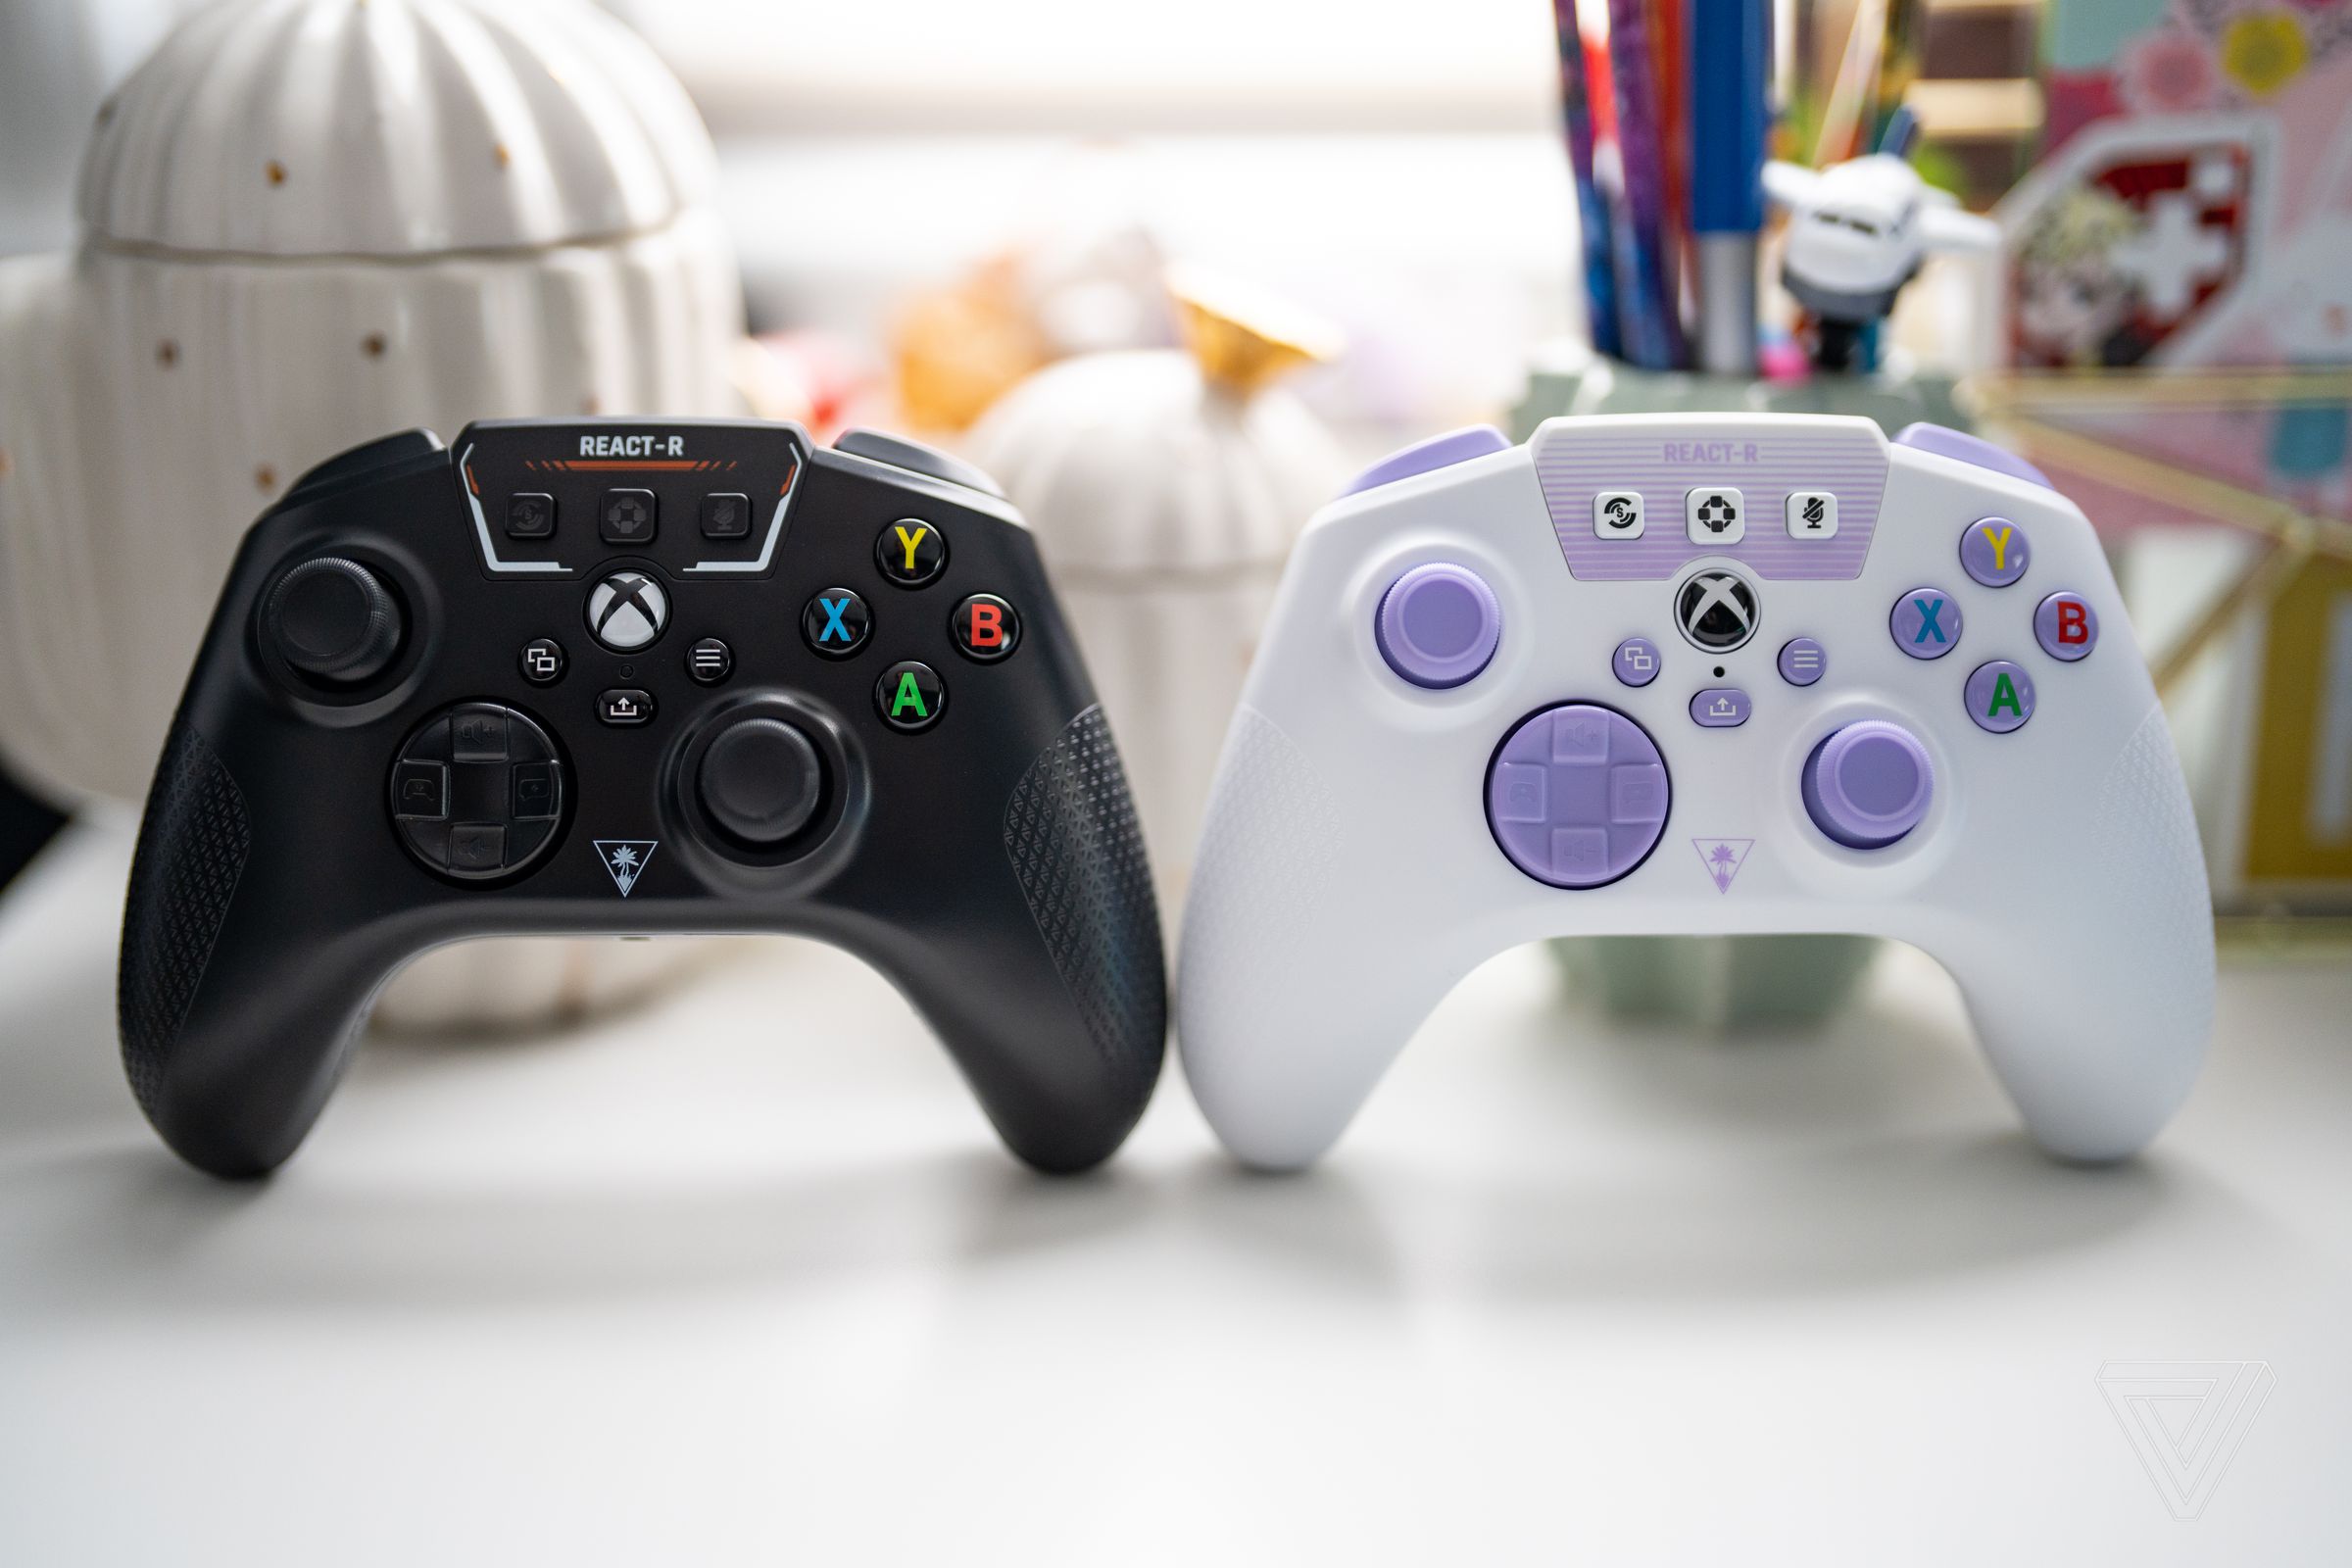 A side-by-side image of the Turtle Beach React-R controllers, black on the left and white / purple on the right.